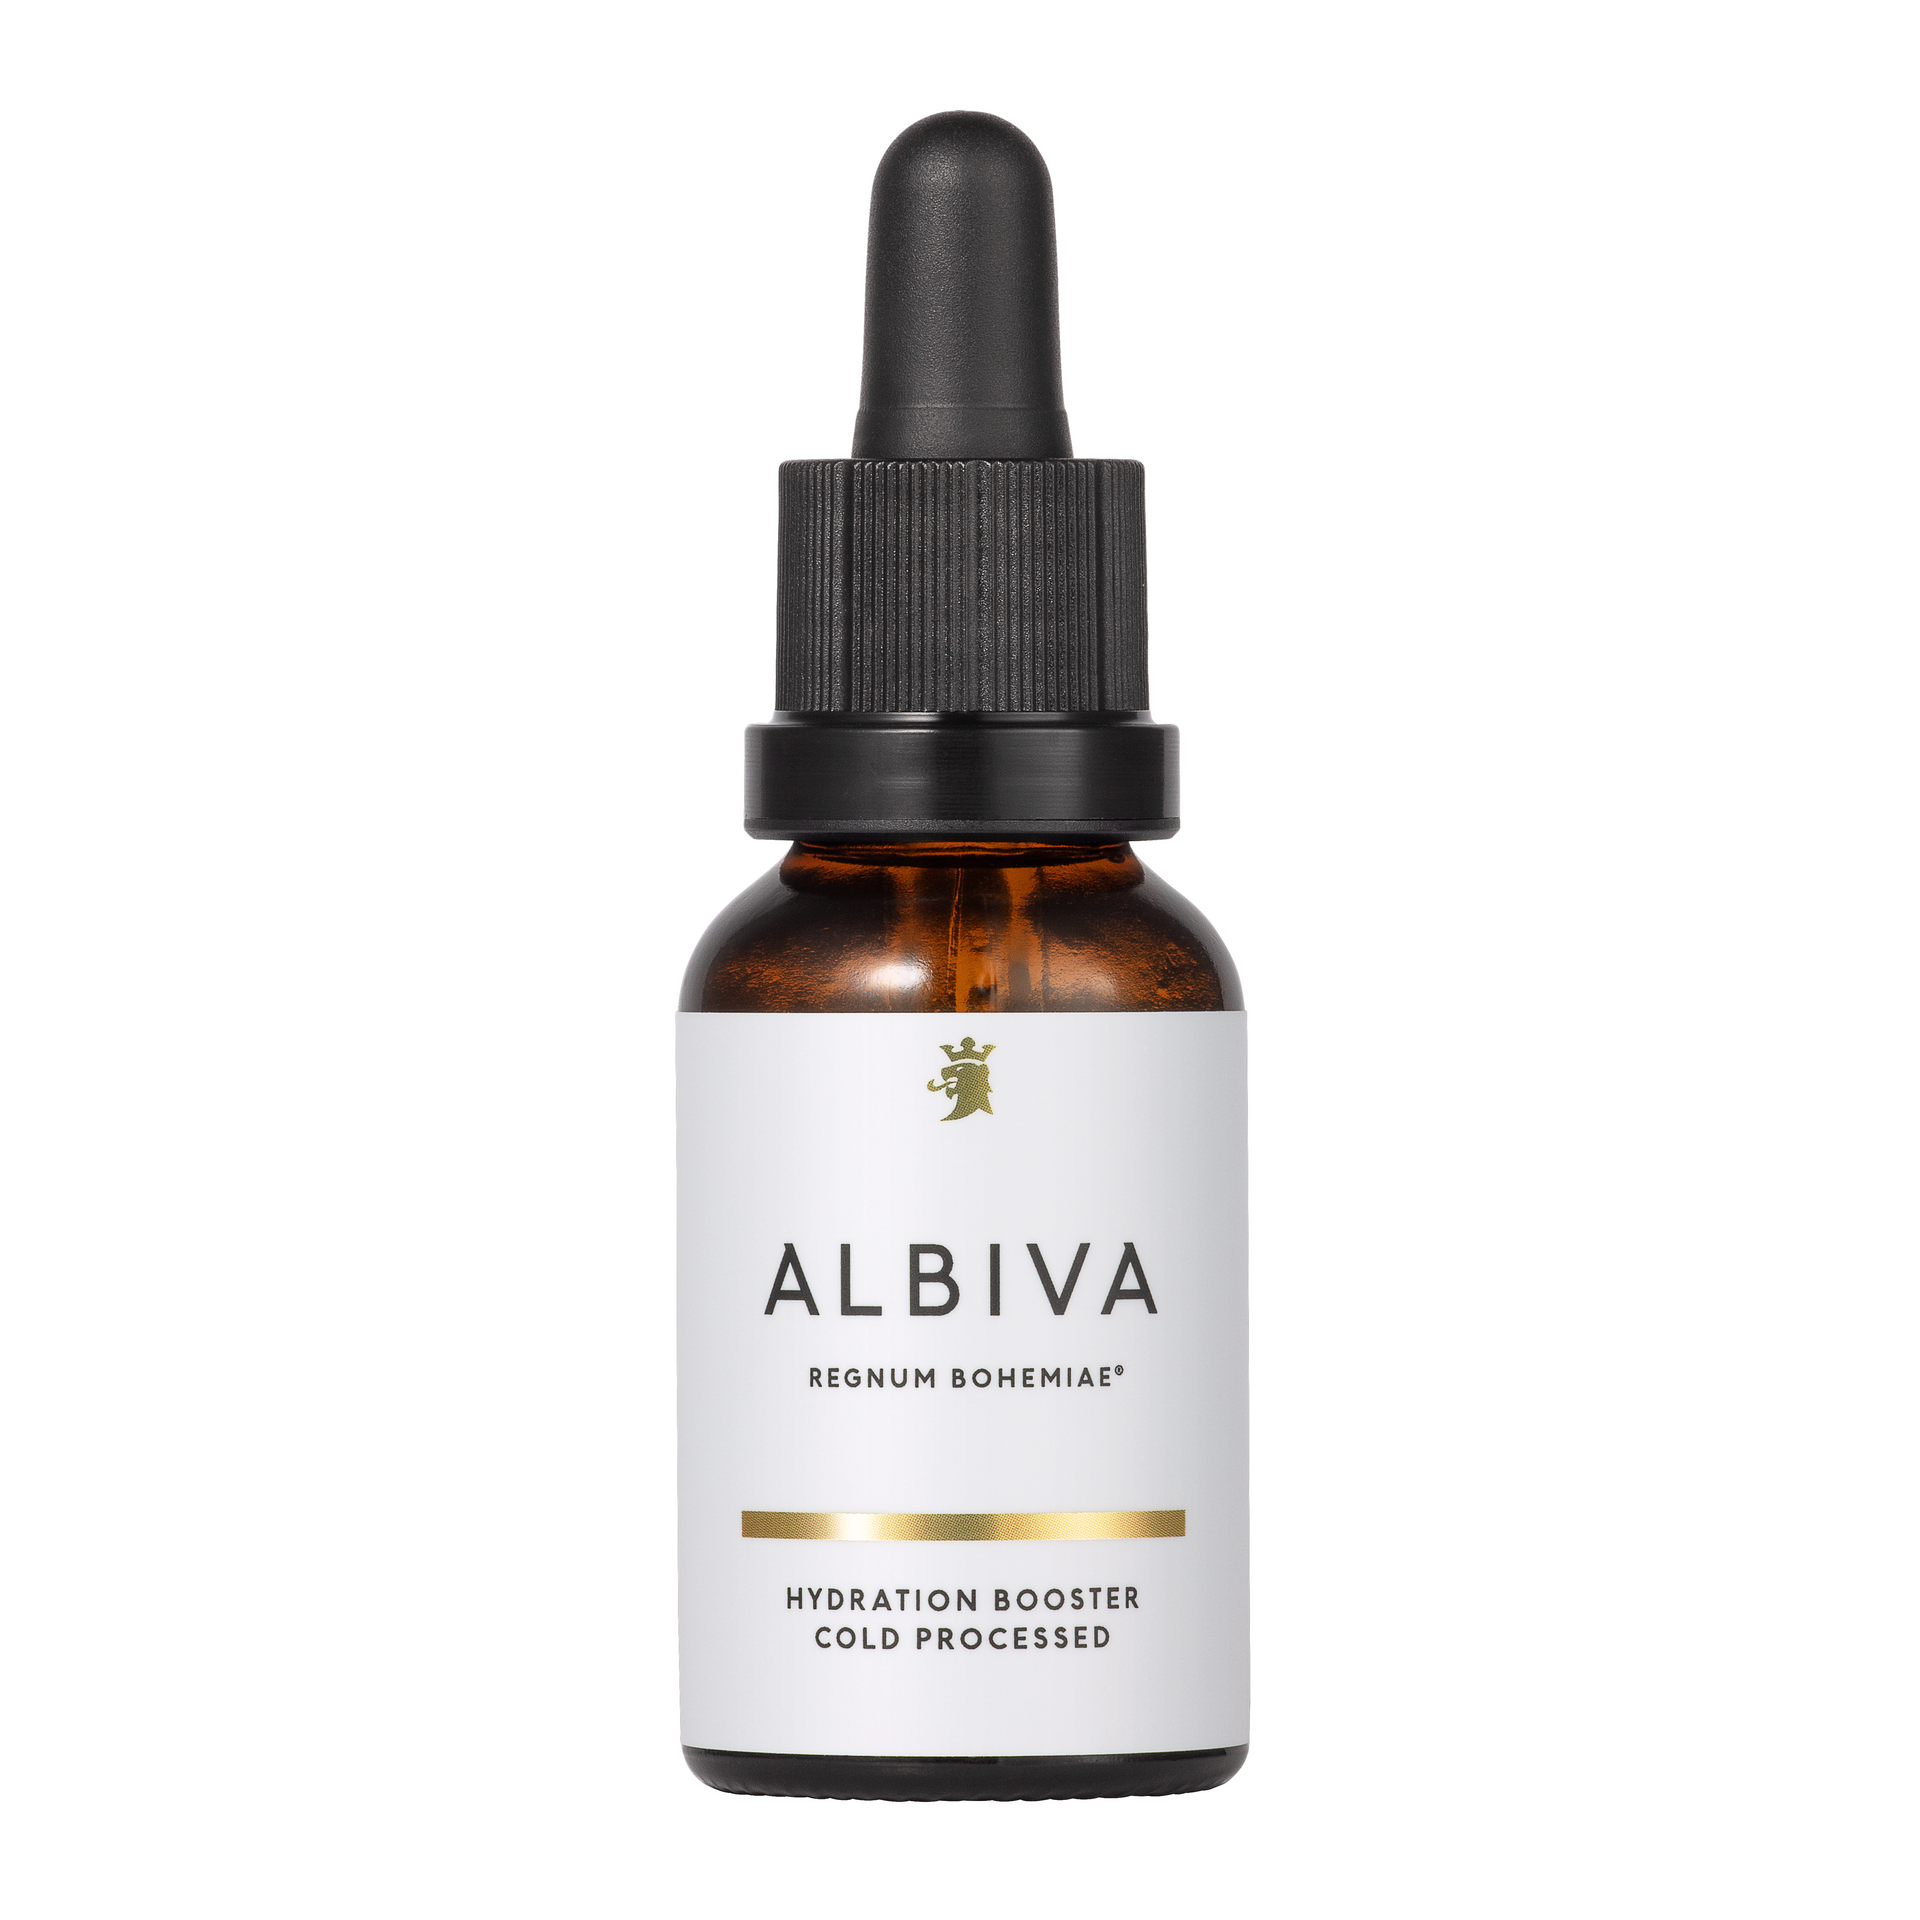 ALBIVA - Hyaluronic Acid Hydration Booster